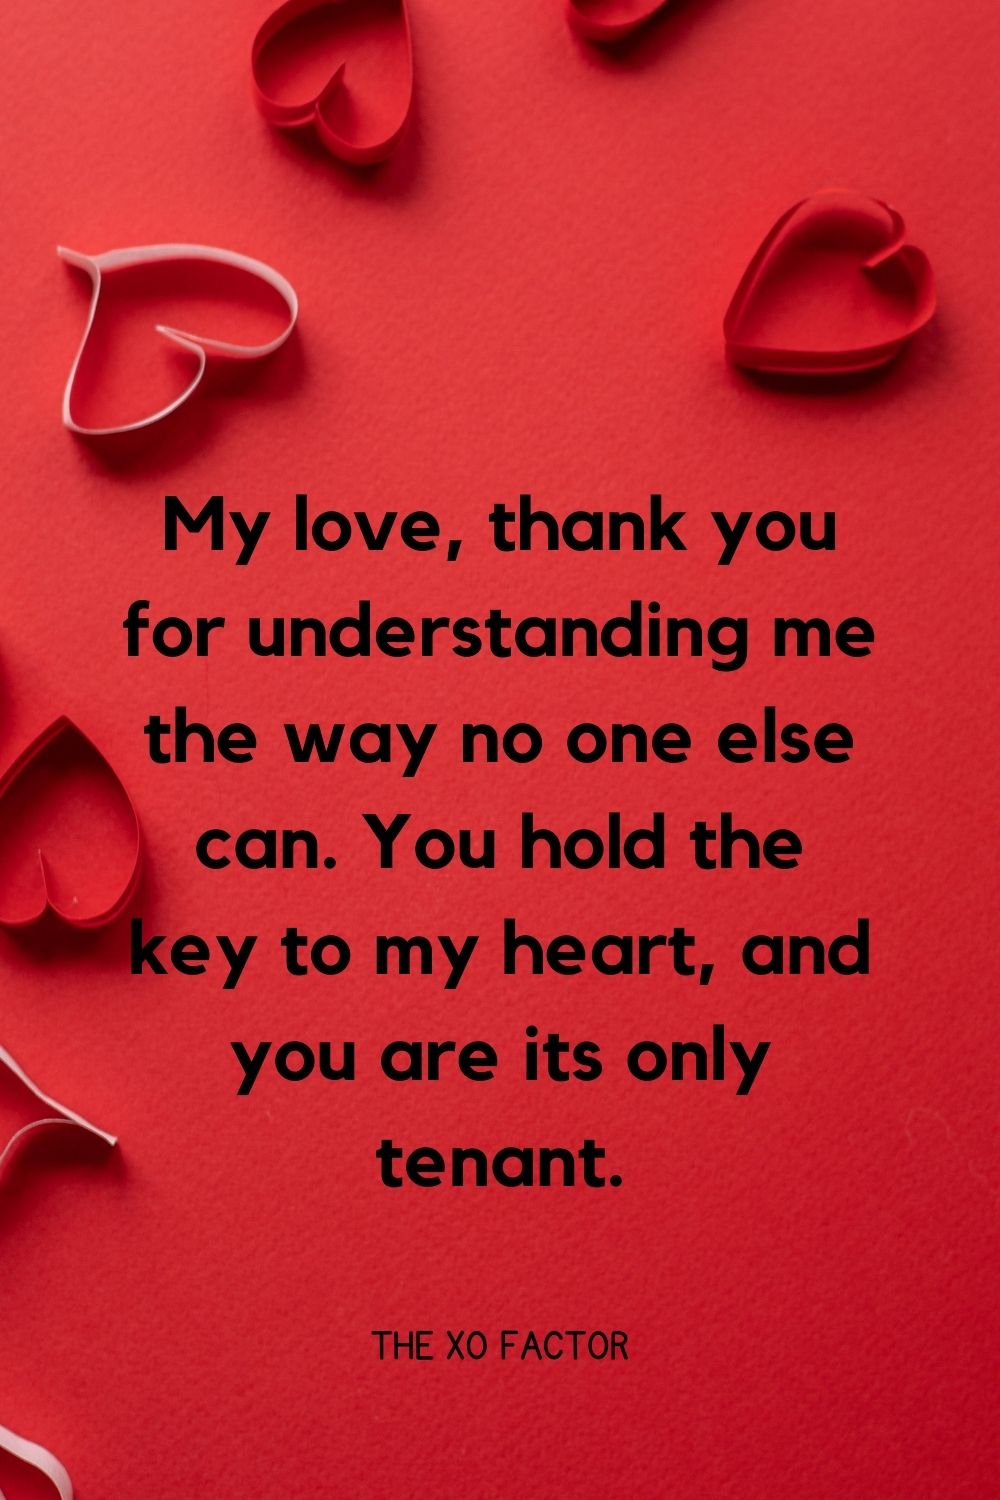 My love, thank you for understanding me the way no one else can. You hold the key to my heart, and you are its only tenant.